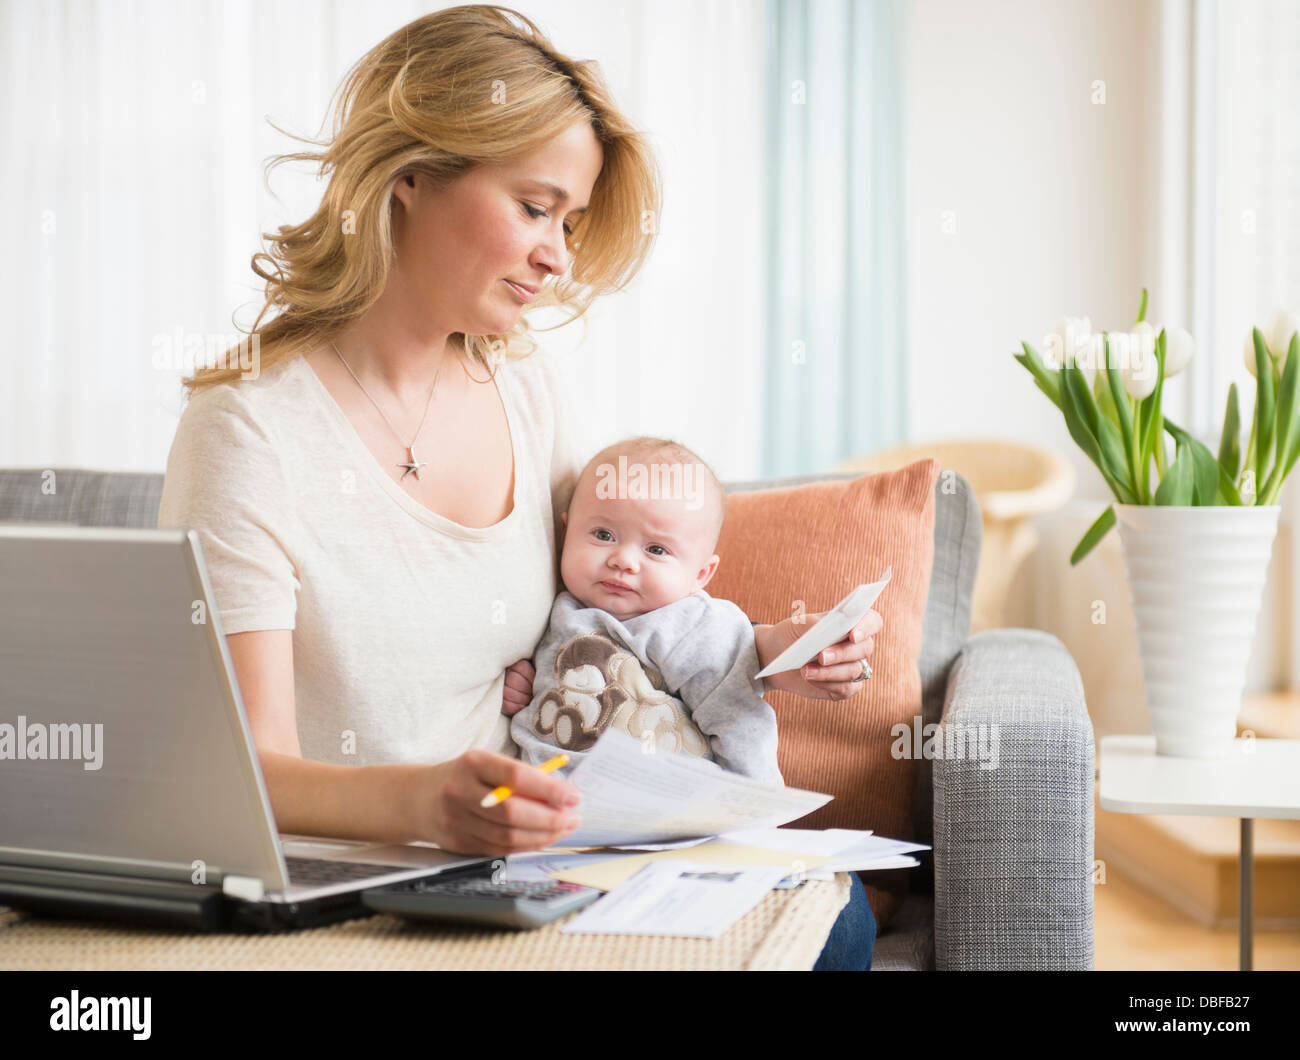 Caucasian mother with baby paying bills Banque D'Images